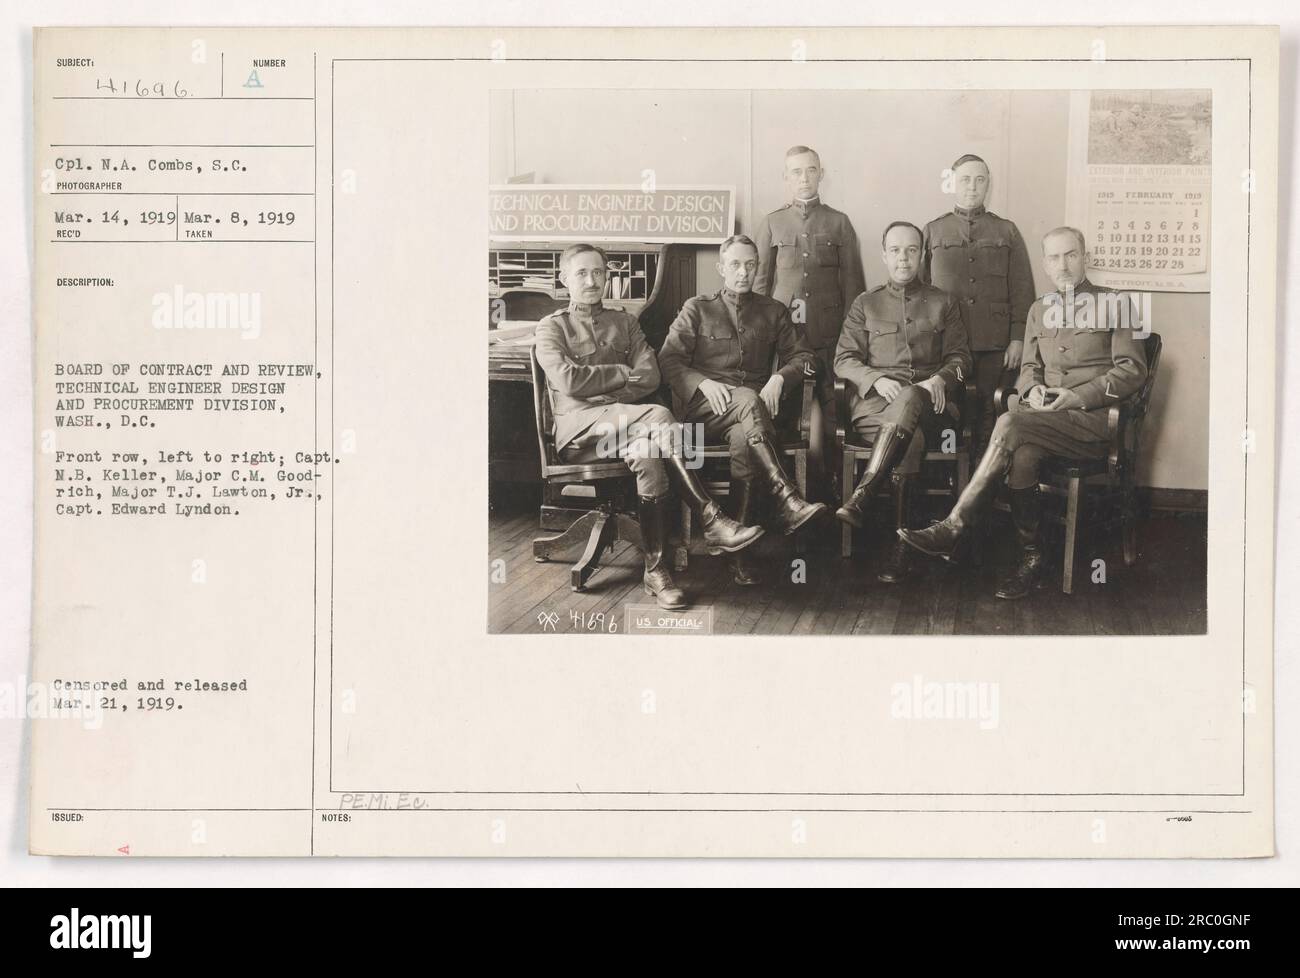 Caption: 'Photograph of the Number Board of Contract and Review, Technical Engineer Design and Procurement Division, taken on March 8, 1919, in Washington D.C. Front row, left to right: Capt. N.B. Keller, Major C.M. Goodrich, Major T.J. Lawton, Jr., Capt. Edward Lyndon. The photo was censored and released on March 21, 1919.' Stock Photo